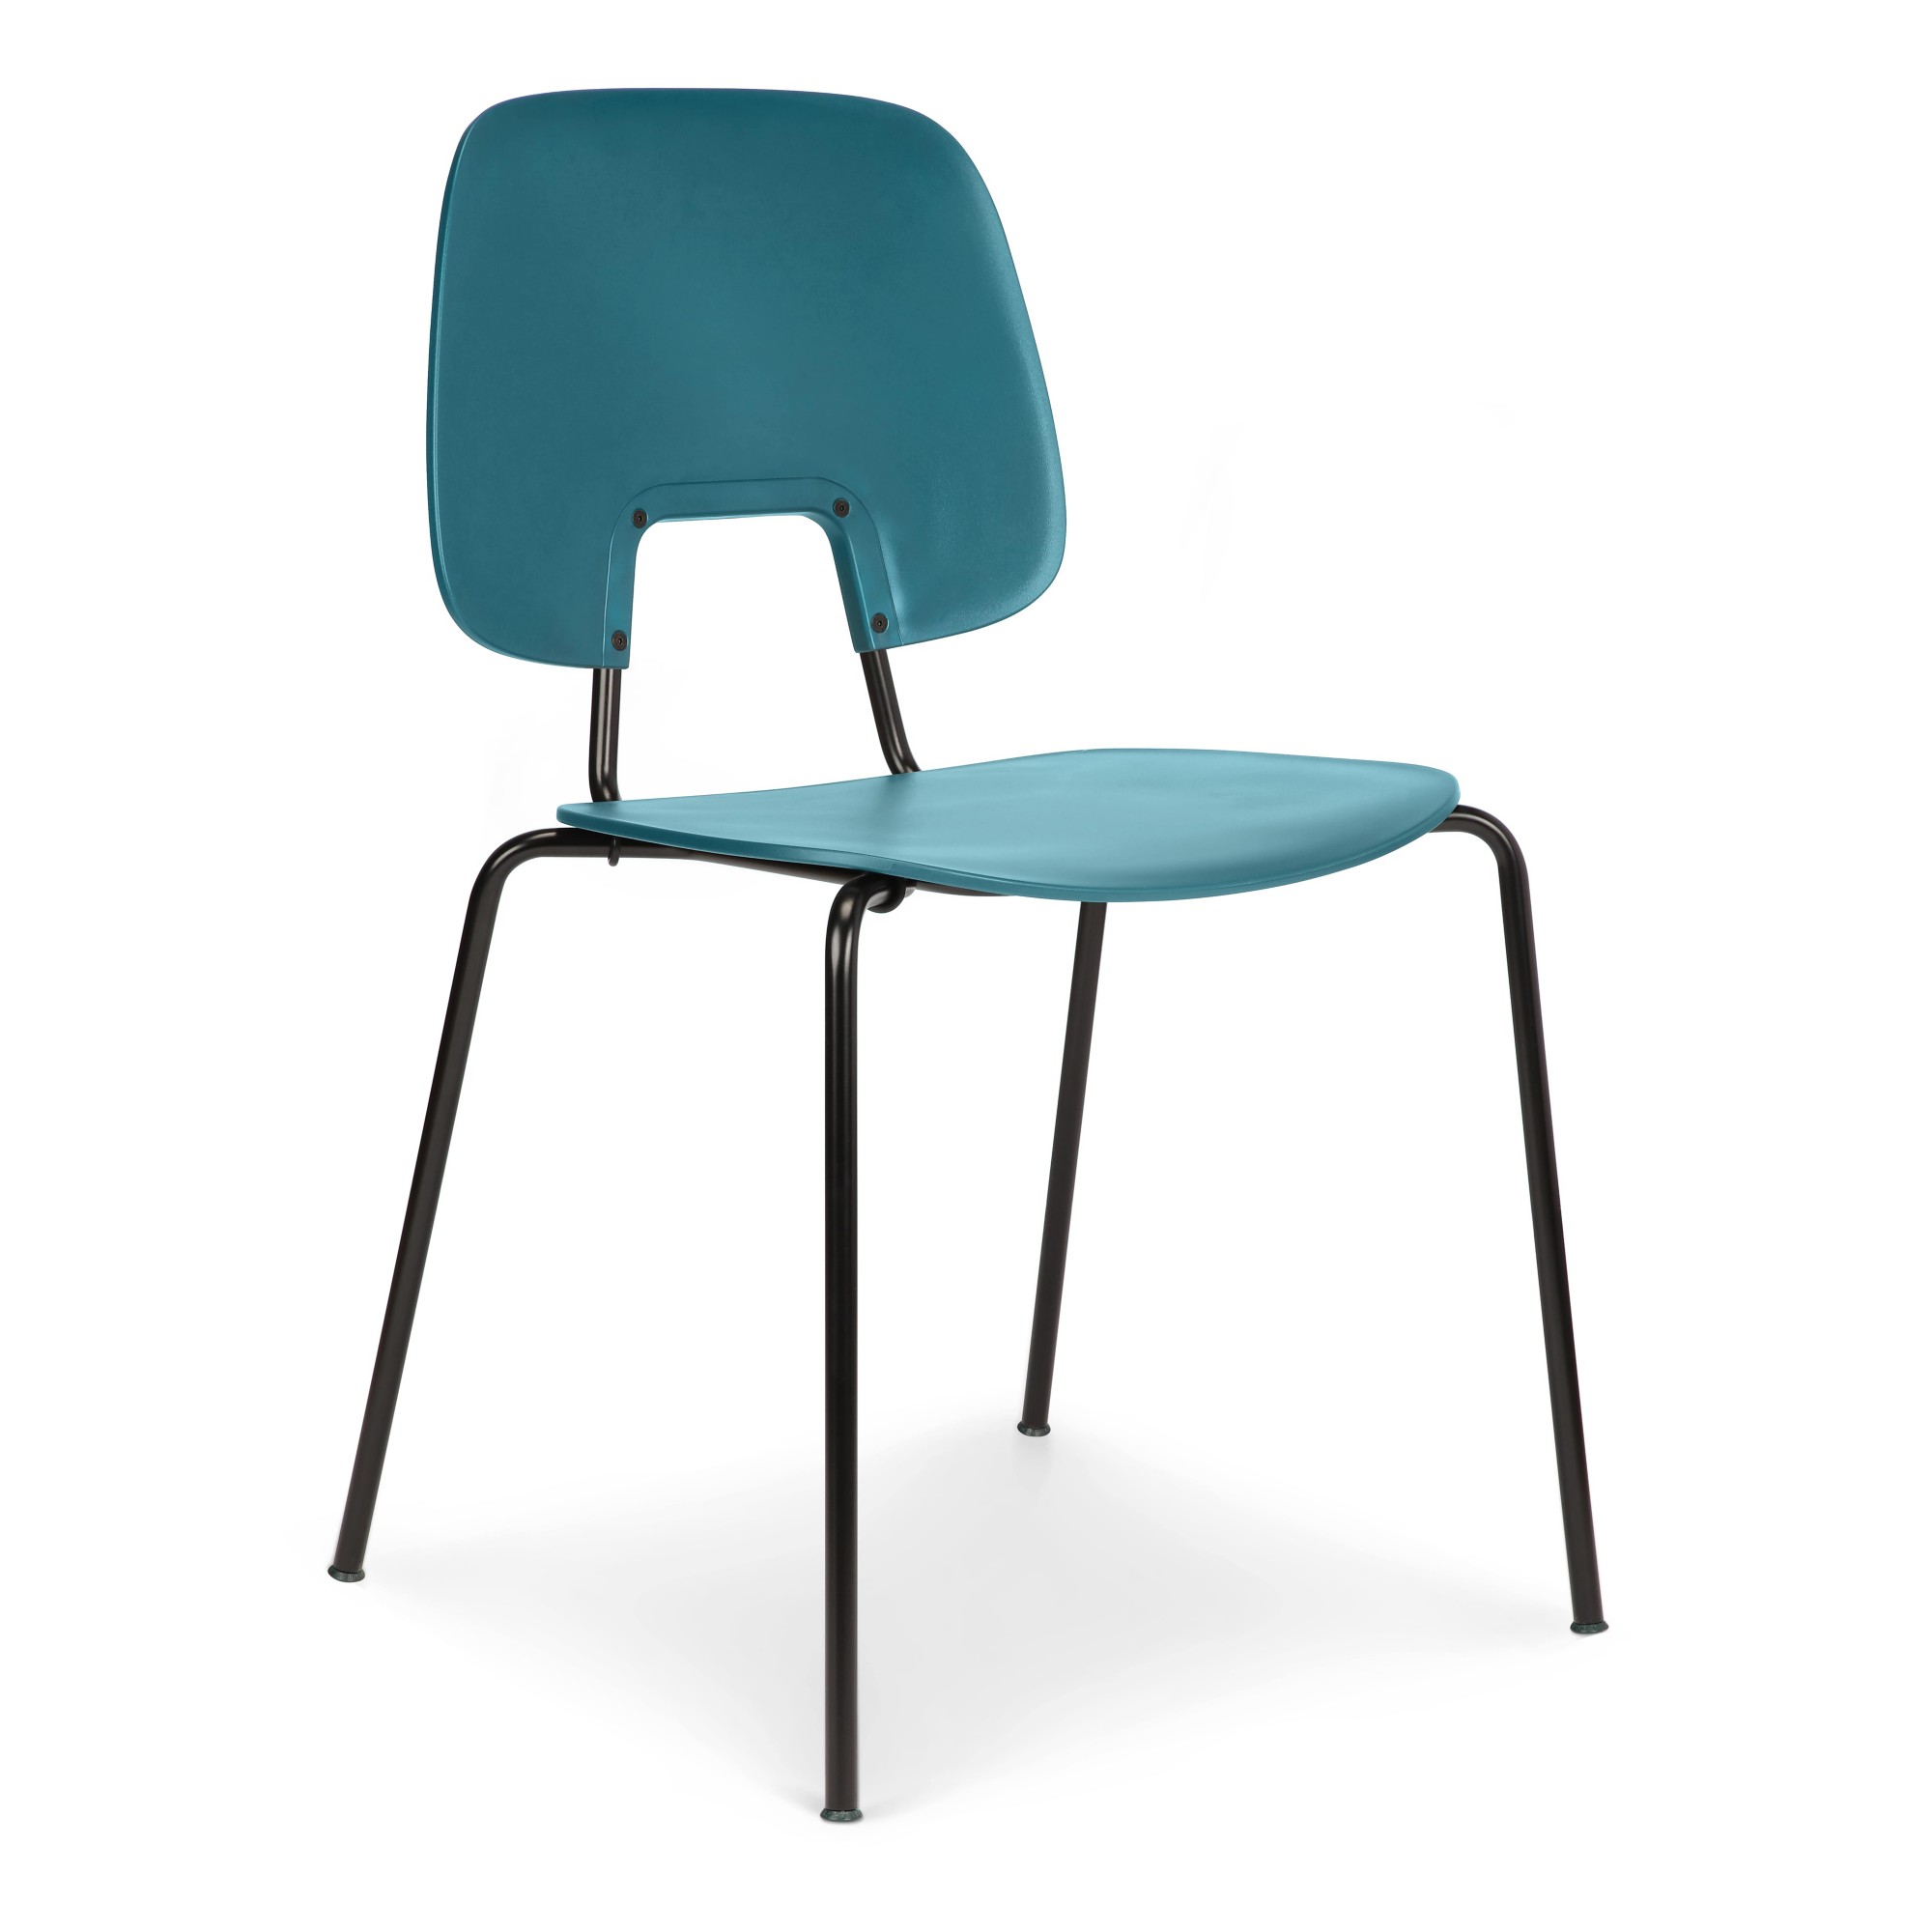 Chair made of ReMed plastic 